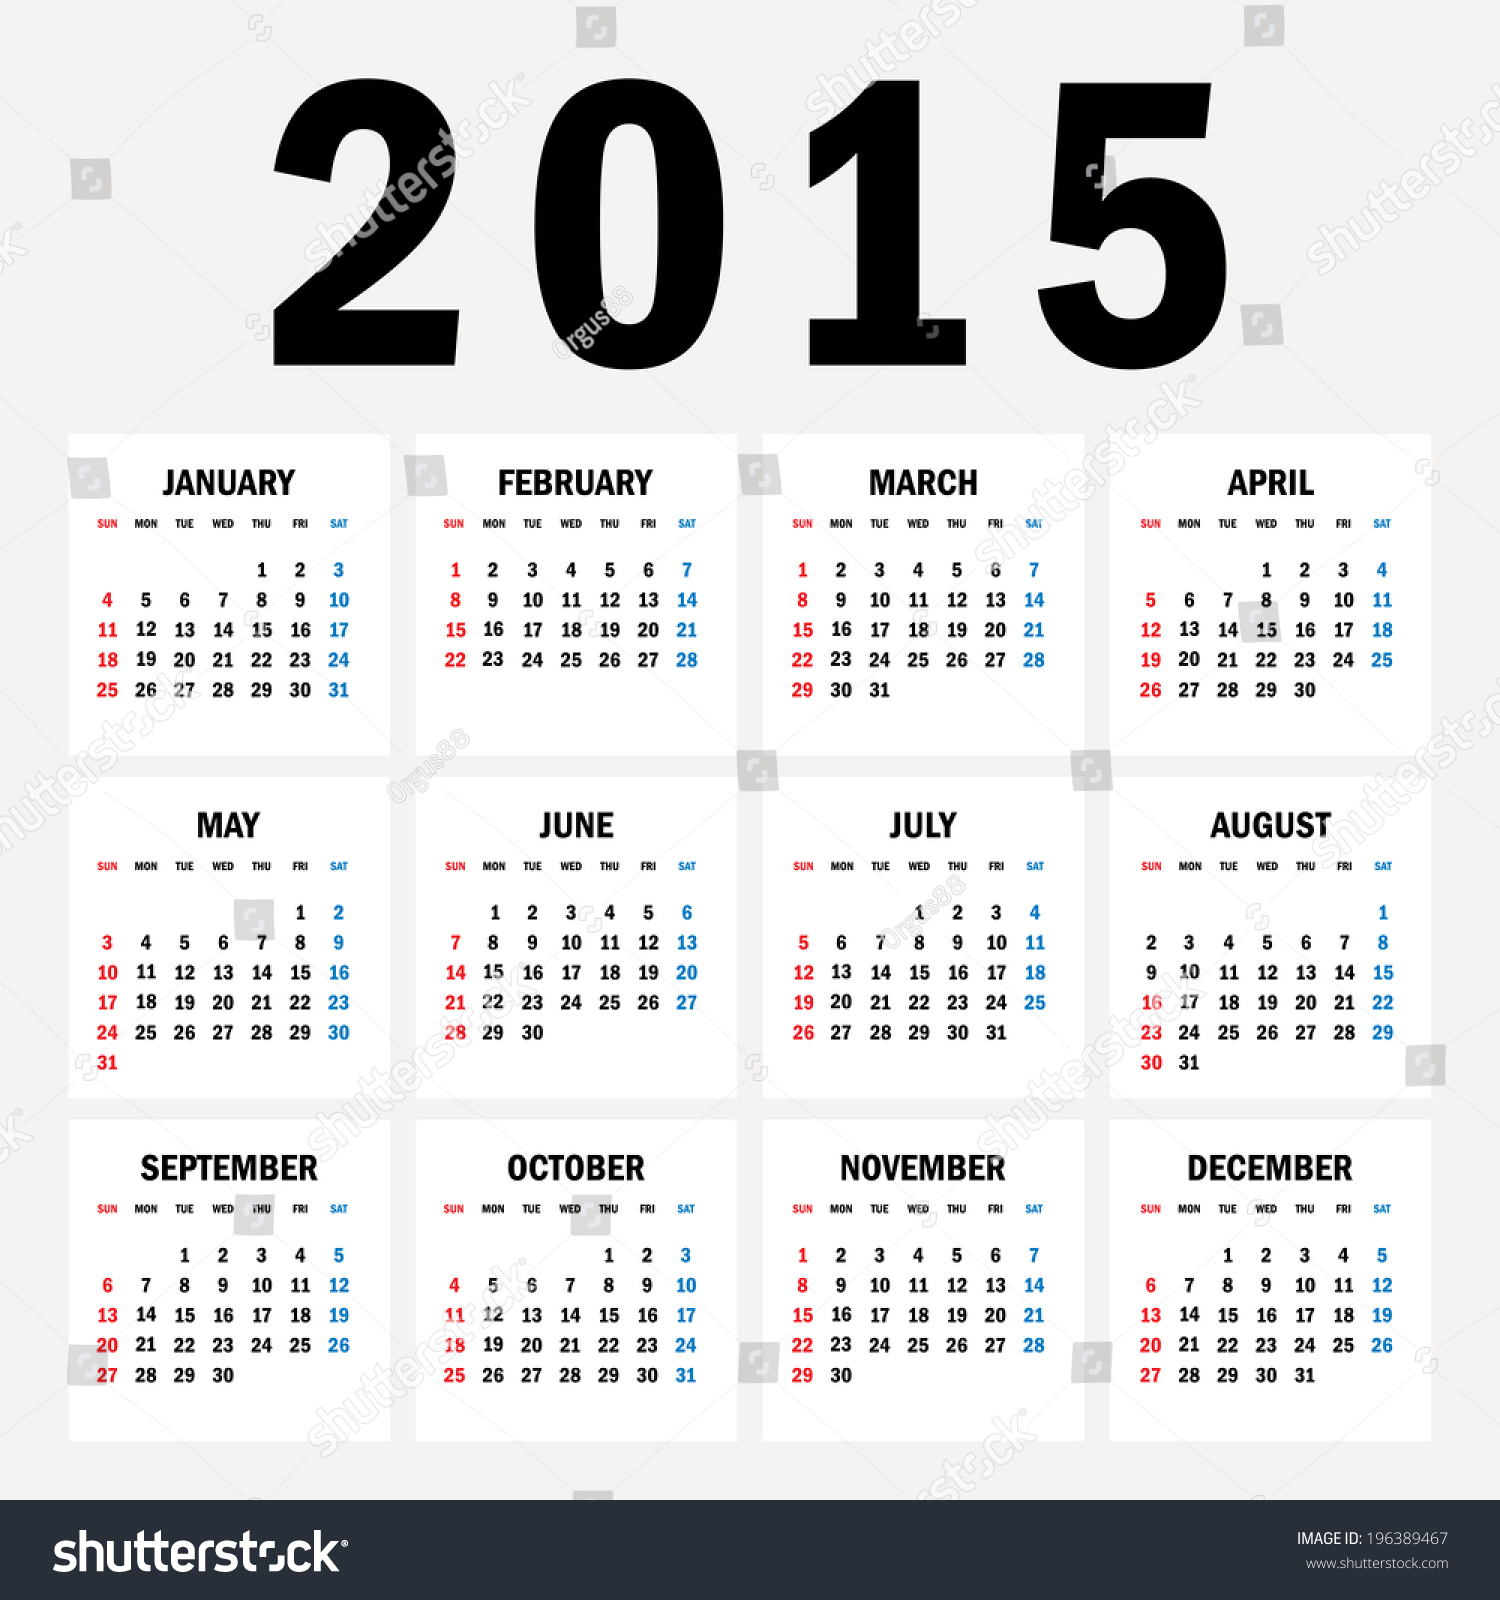 Holiday List 2015 India | New Calendar Template Site